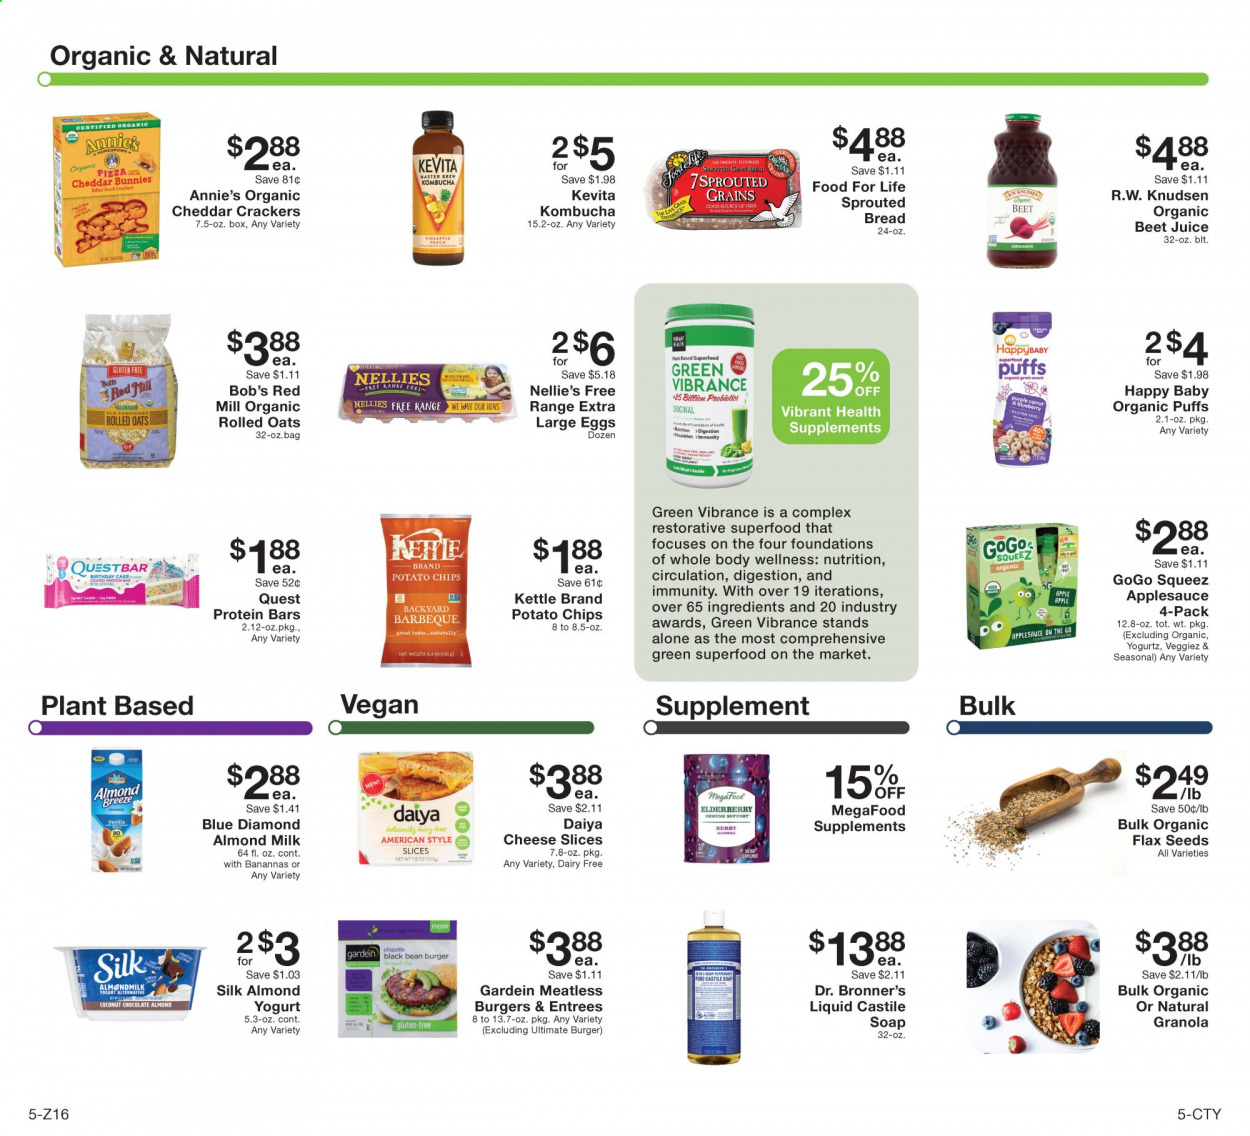 thumbnail - Fairway Market Flyer - 03/19/2021 - 03/25/2021 - Sales products - bread, puffs, cake, coconut, pizza, hamburger, Annie's, sliced cheese, cheddar, cheese, yoghurt, almond milk, large eggs, beans, chocolate, crackers, potato chips, chips, oats, granola, rolled oats, protein bar, apple sauce, Blue Diamond, juice, kombucha, KeVita, pineapple. Page 5.